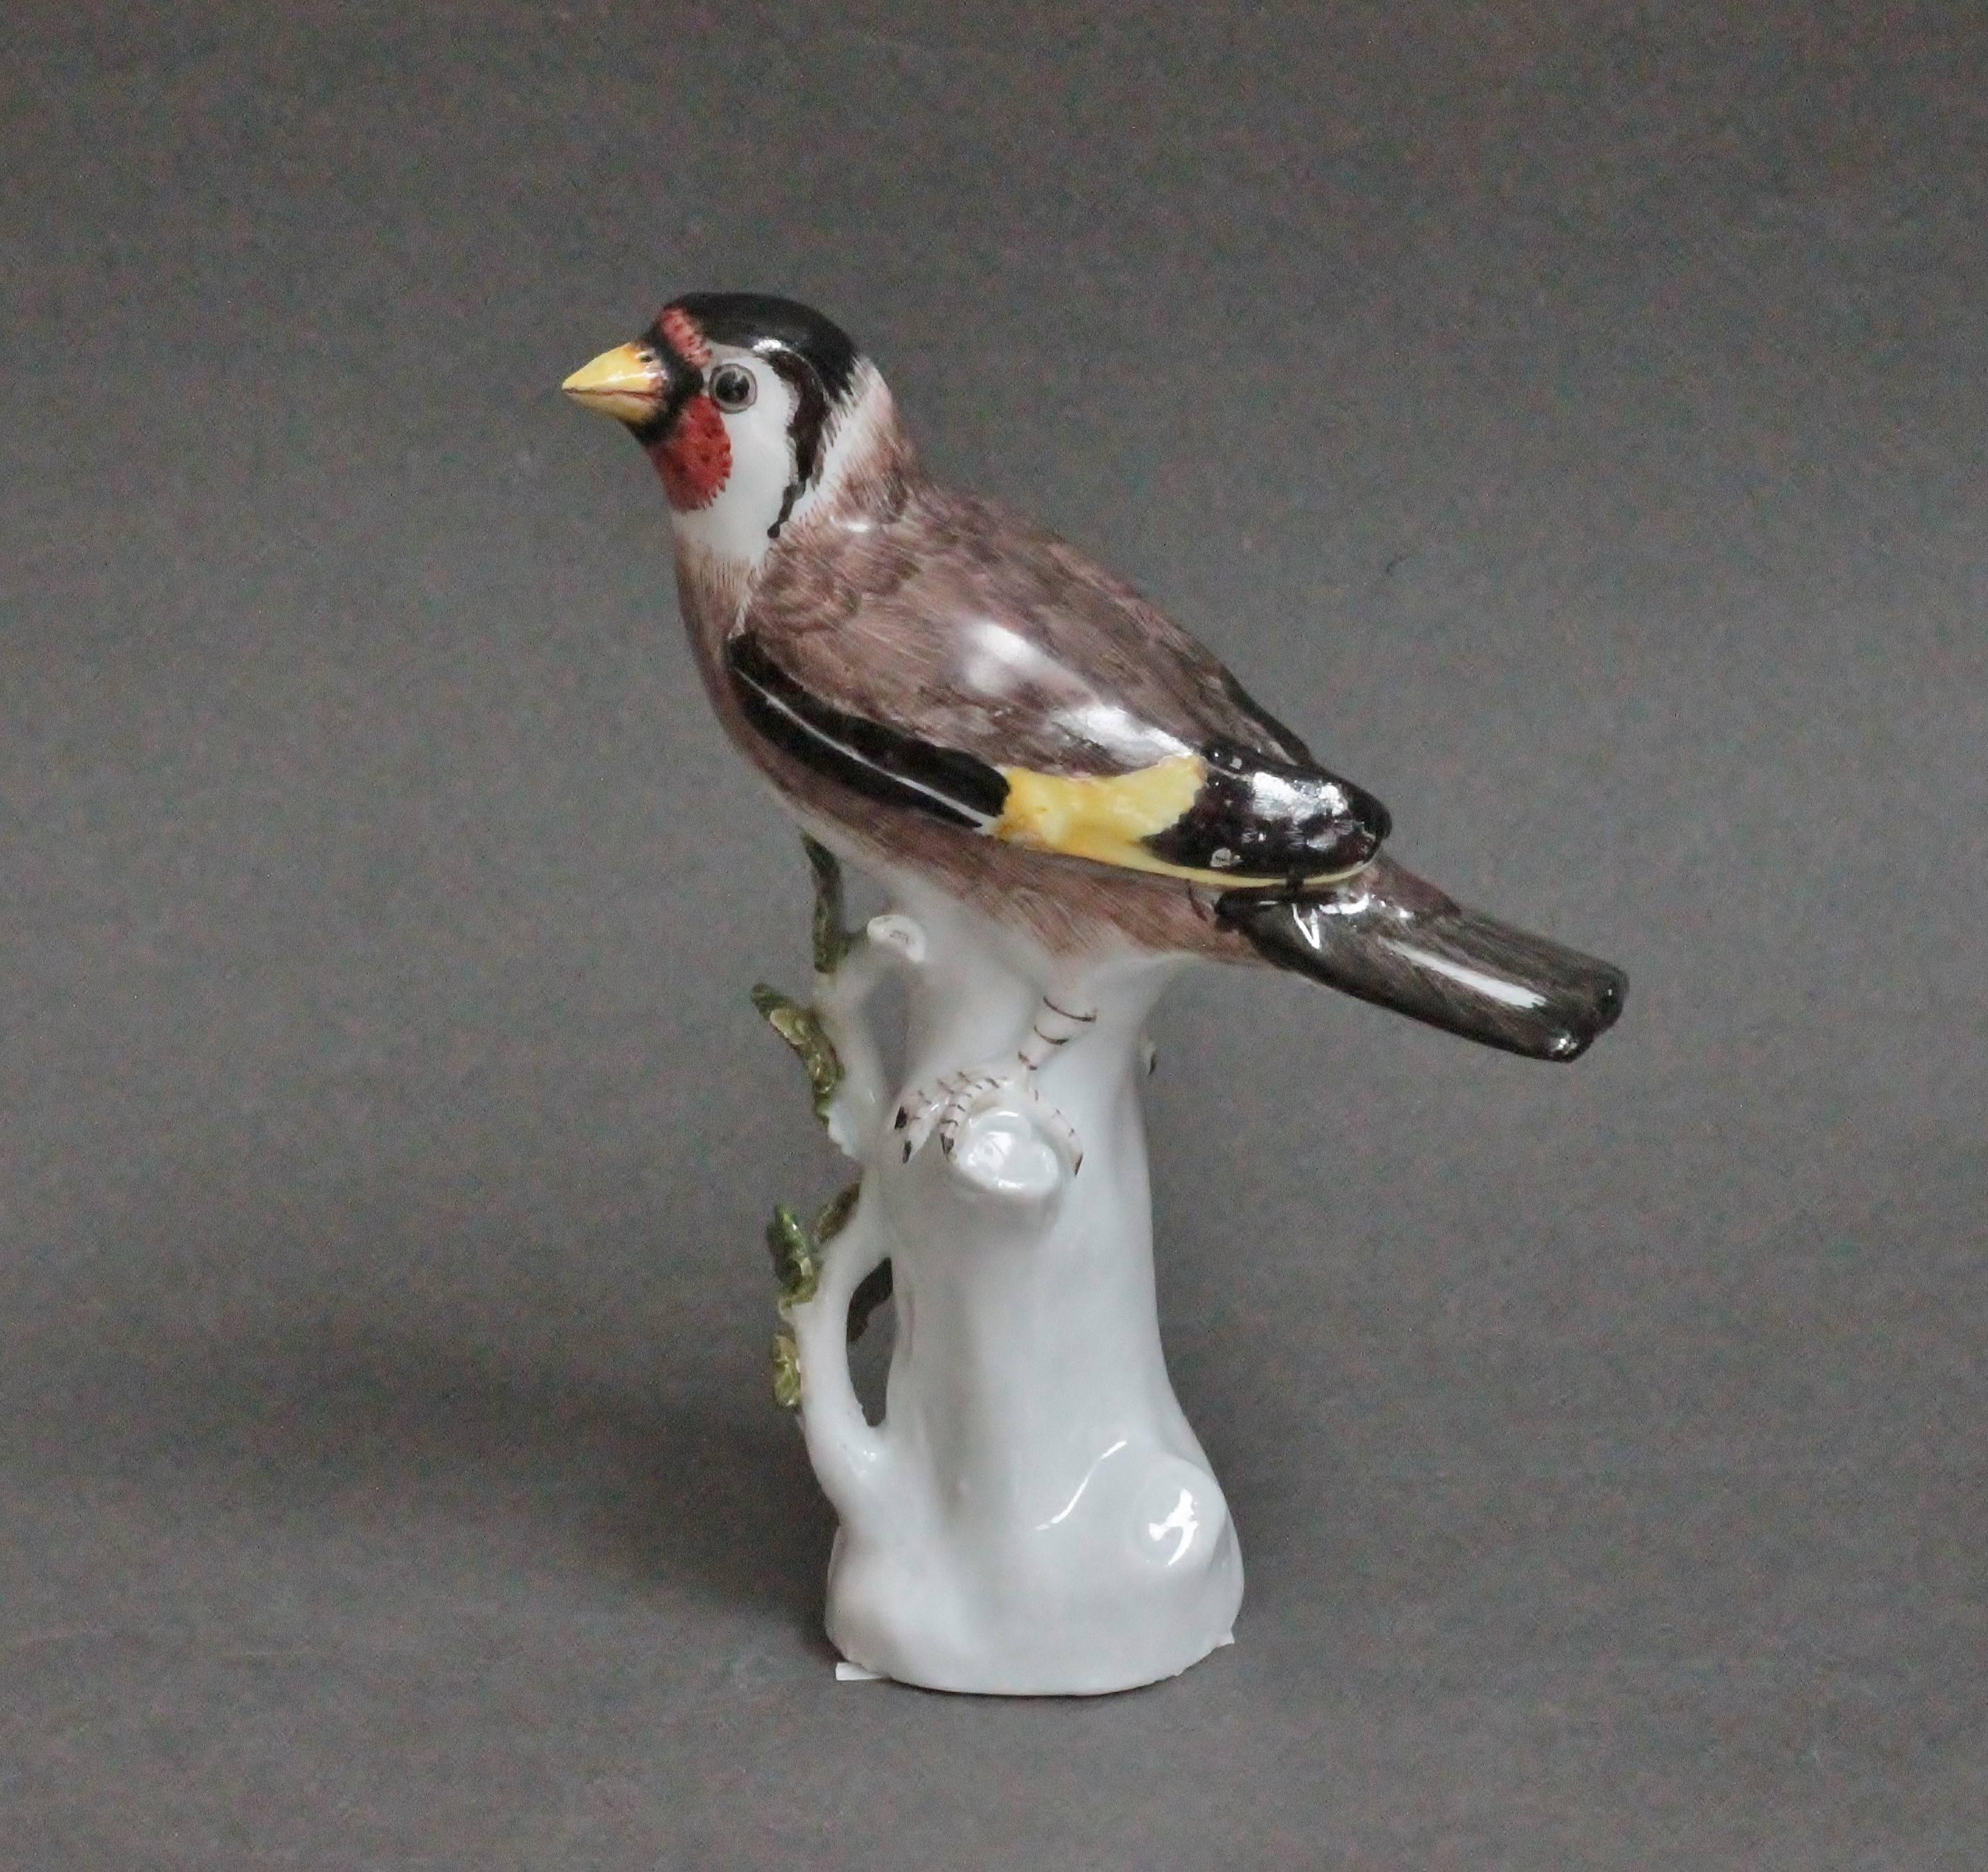 Porcelain figure of goldfinch perched on tree-stumps applied with leaves, modelled by J.J. Kandler in 1740.
Crossed swords mark in underglaze-blue. Meissen manufacture, circa 1745, 18th century.
Measures: Depth 5 cm, width 9 cm, height 13